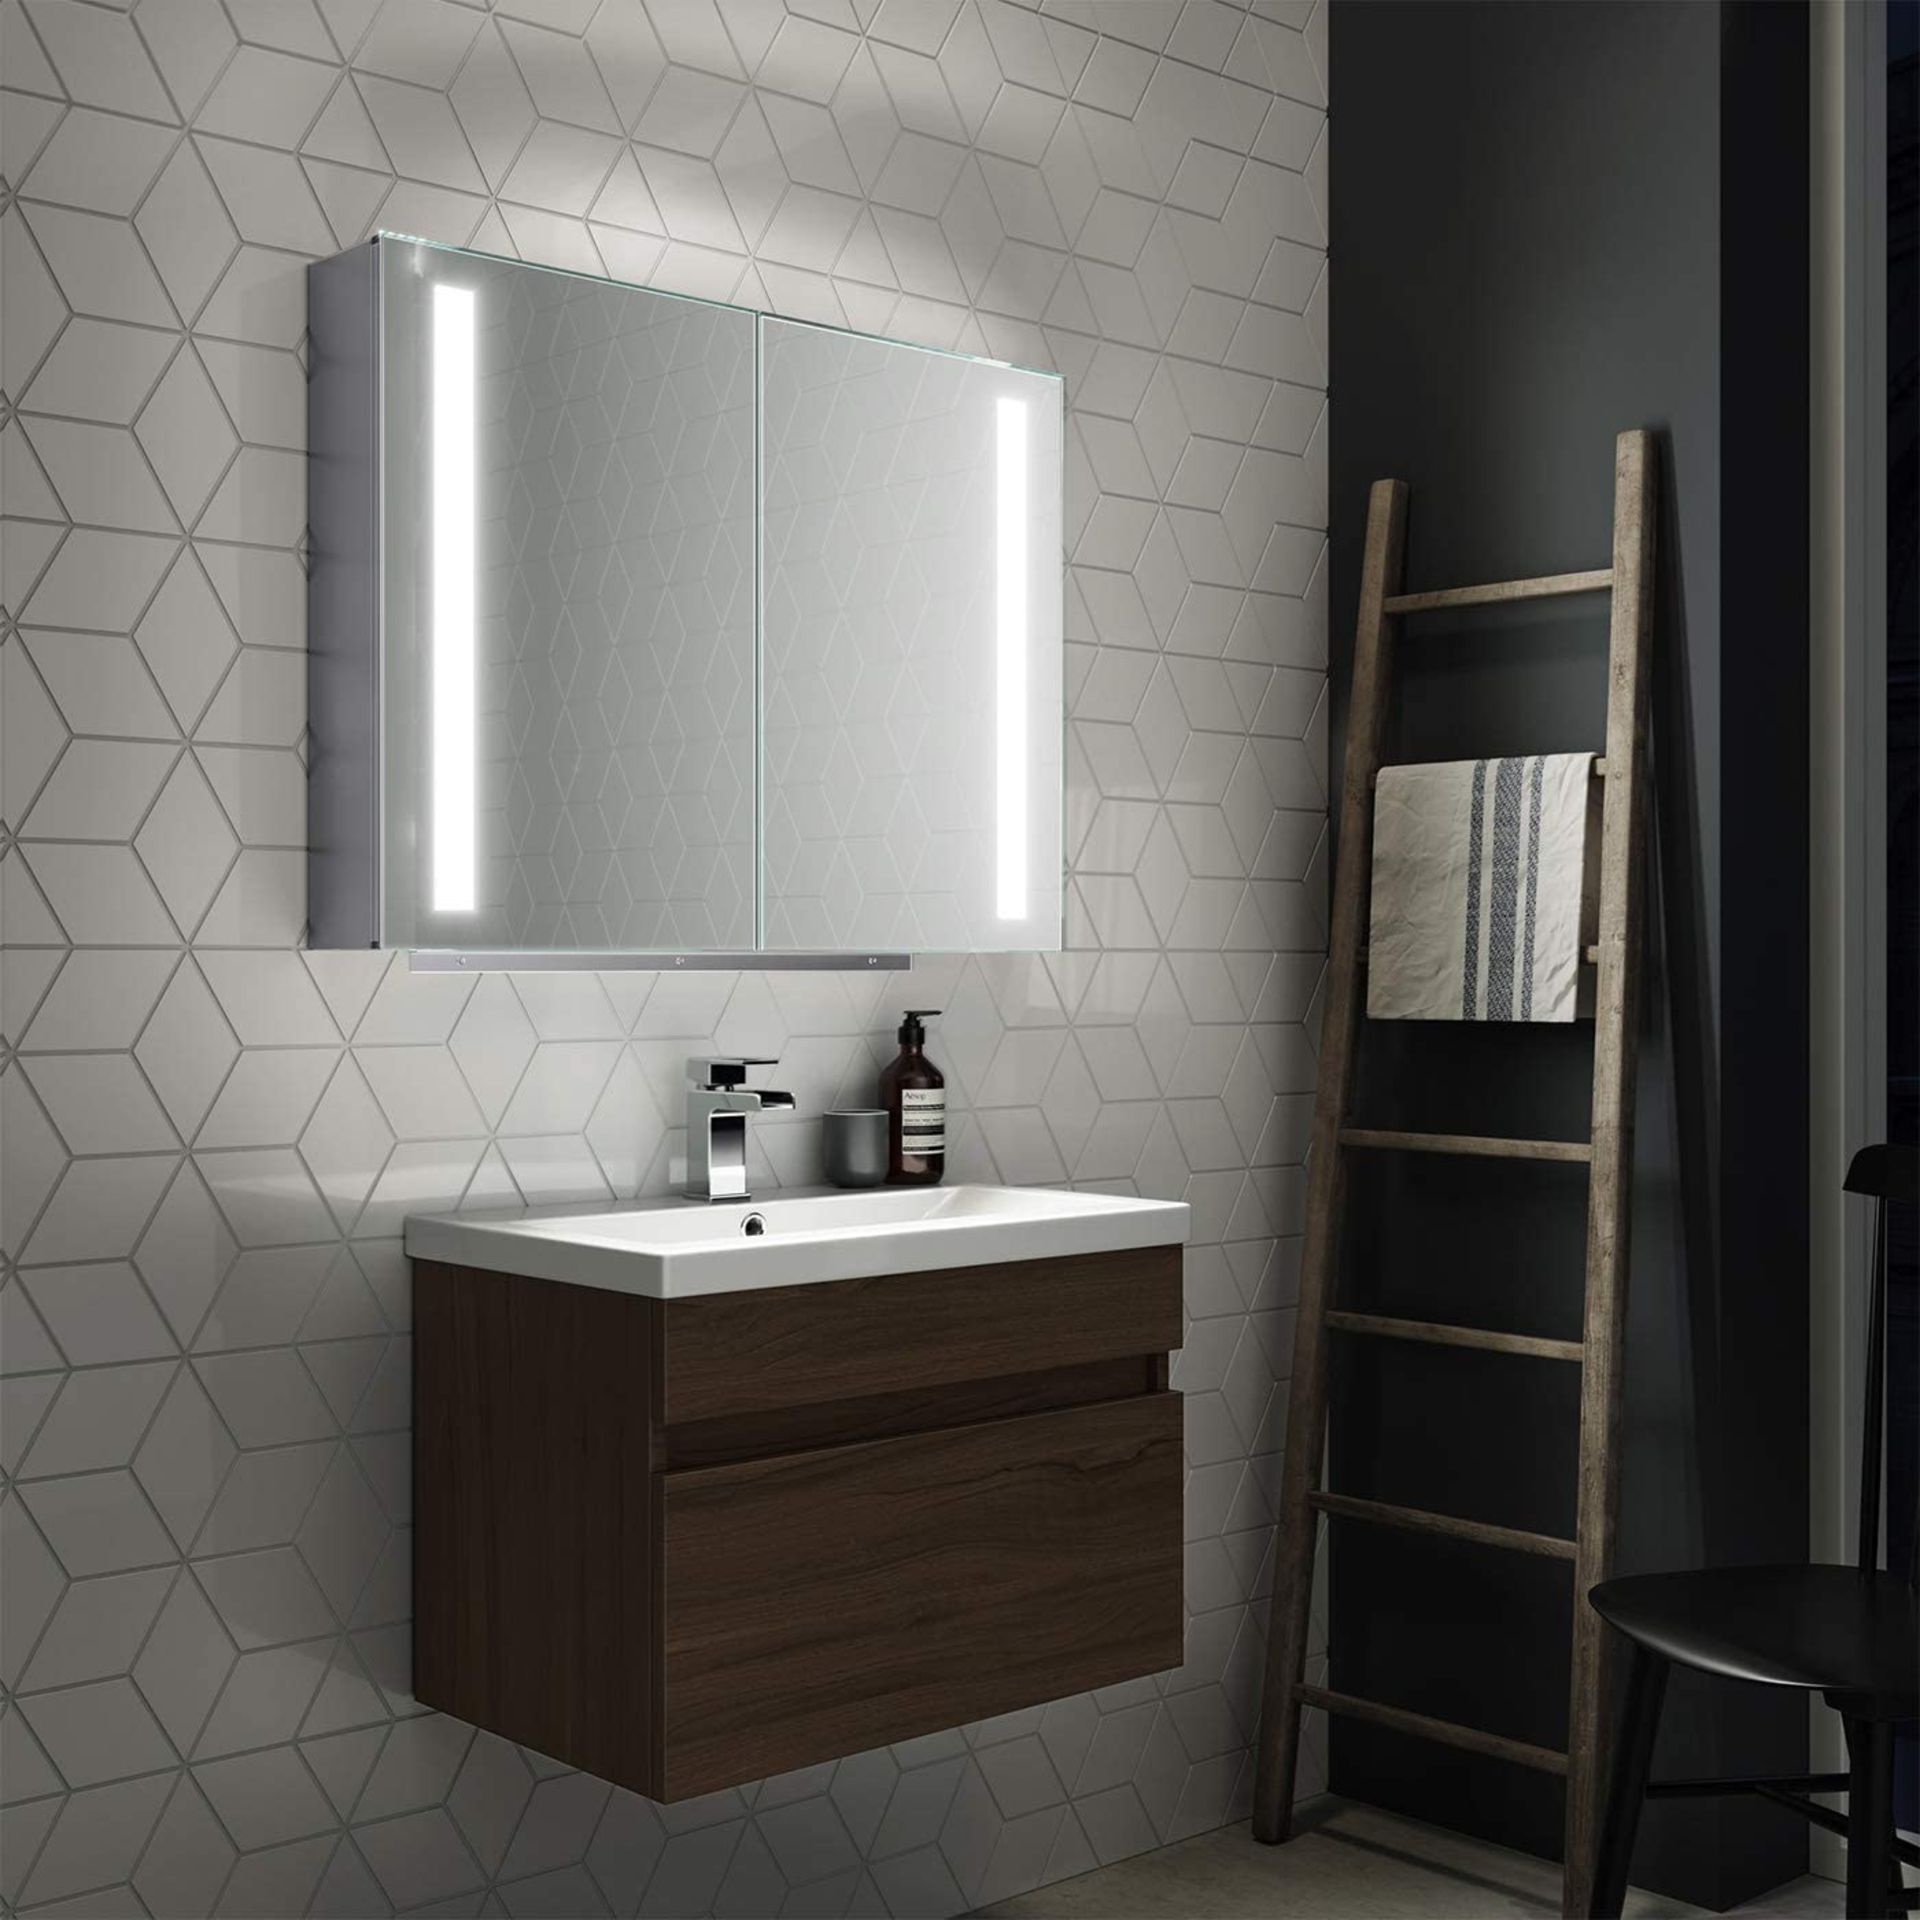 New 800 x 600mm Dawn Illuminated Led Mirror Cabinet. RRP £939.99.Mc164.We Love This Mirror Ca... New - Image 2 of 2